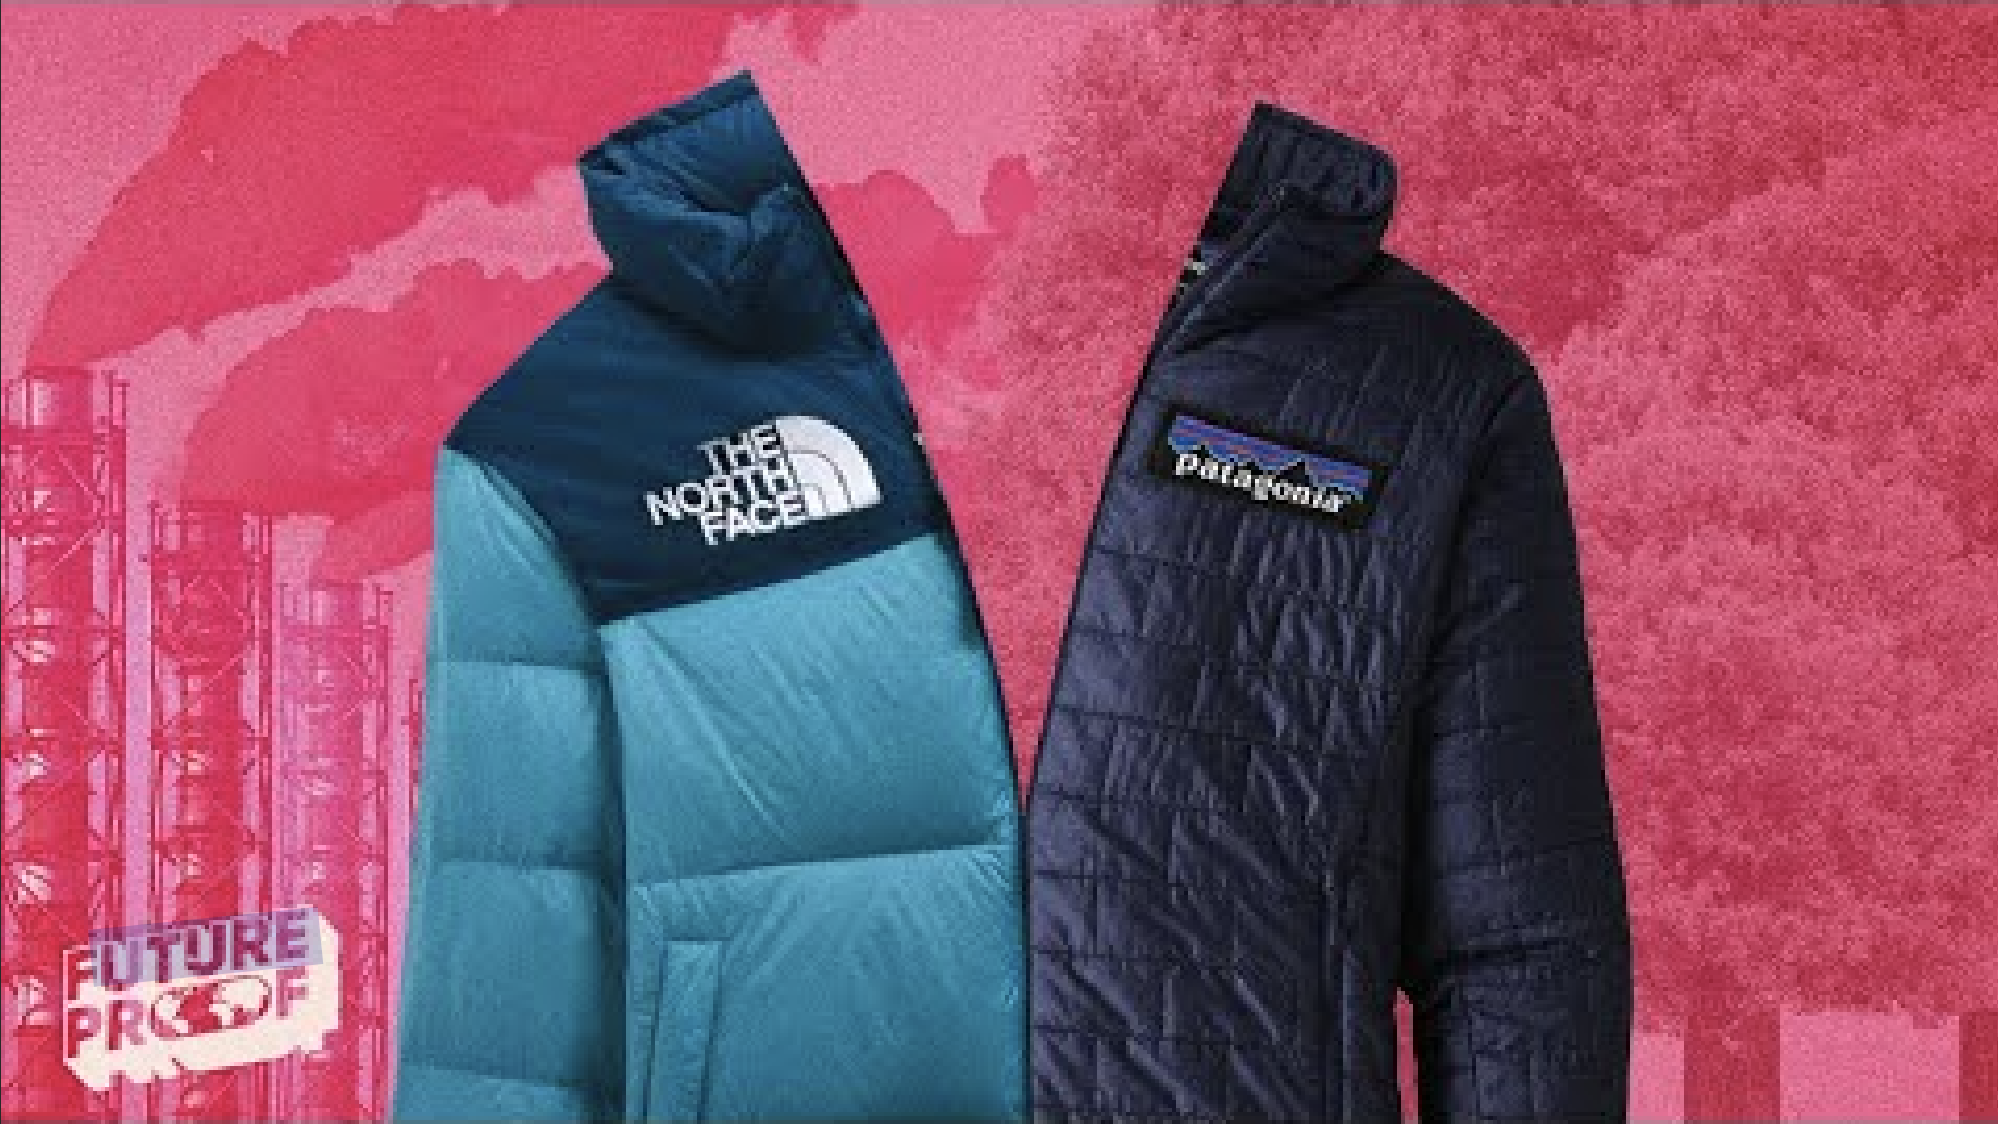 WATCH: How Did Patagonia And The North Face End Up So Different?